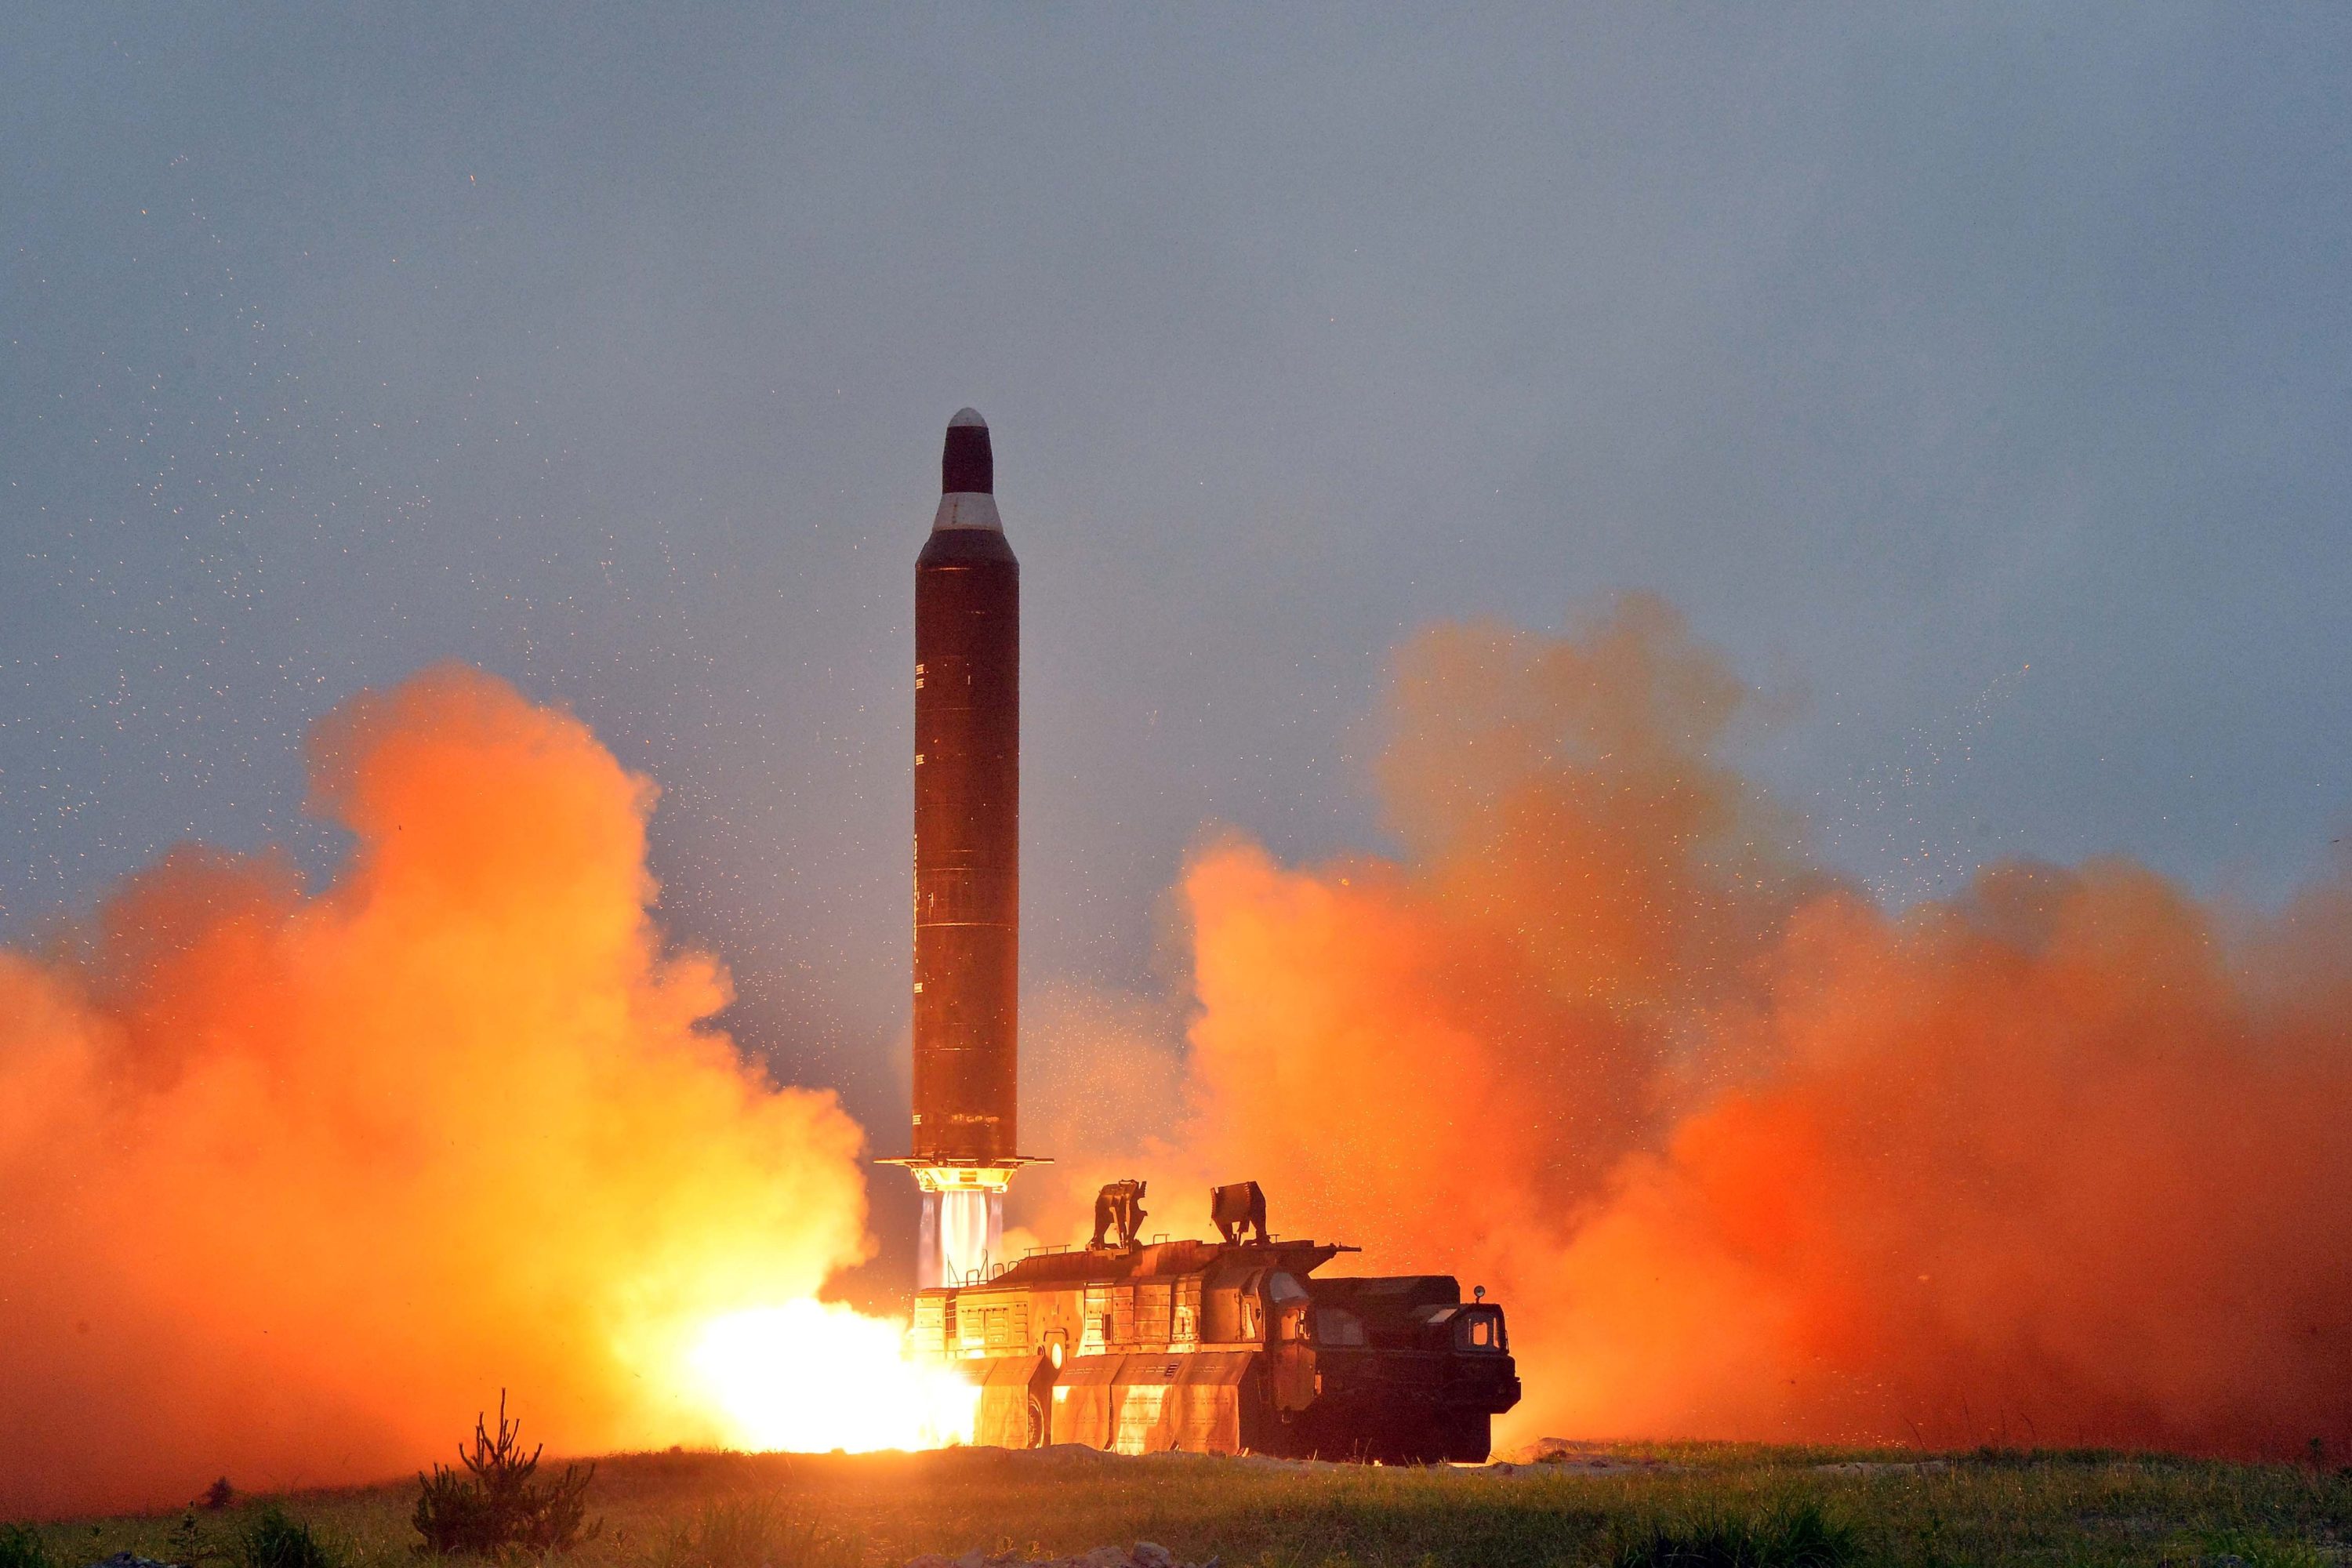 Preempting Preemption: How America Can Respond to North Korea’s Nuclear Program